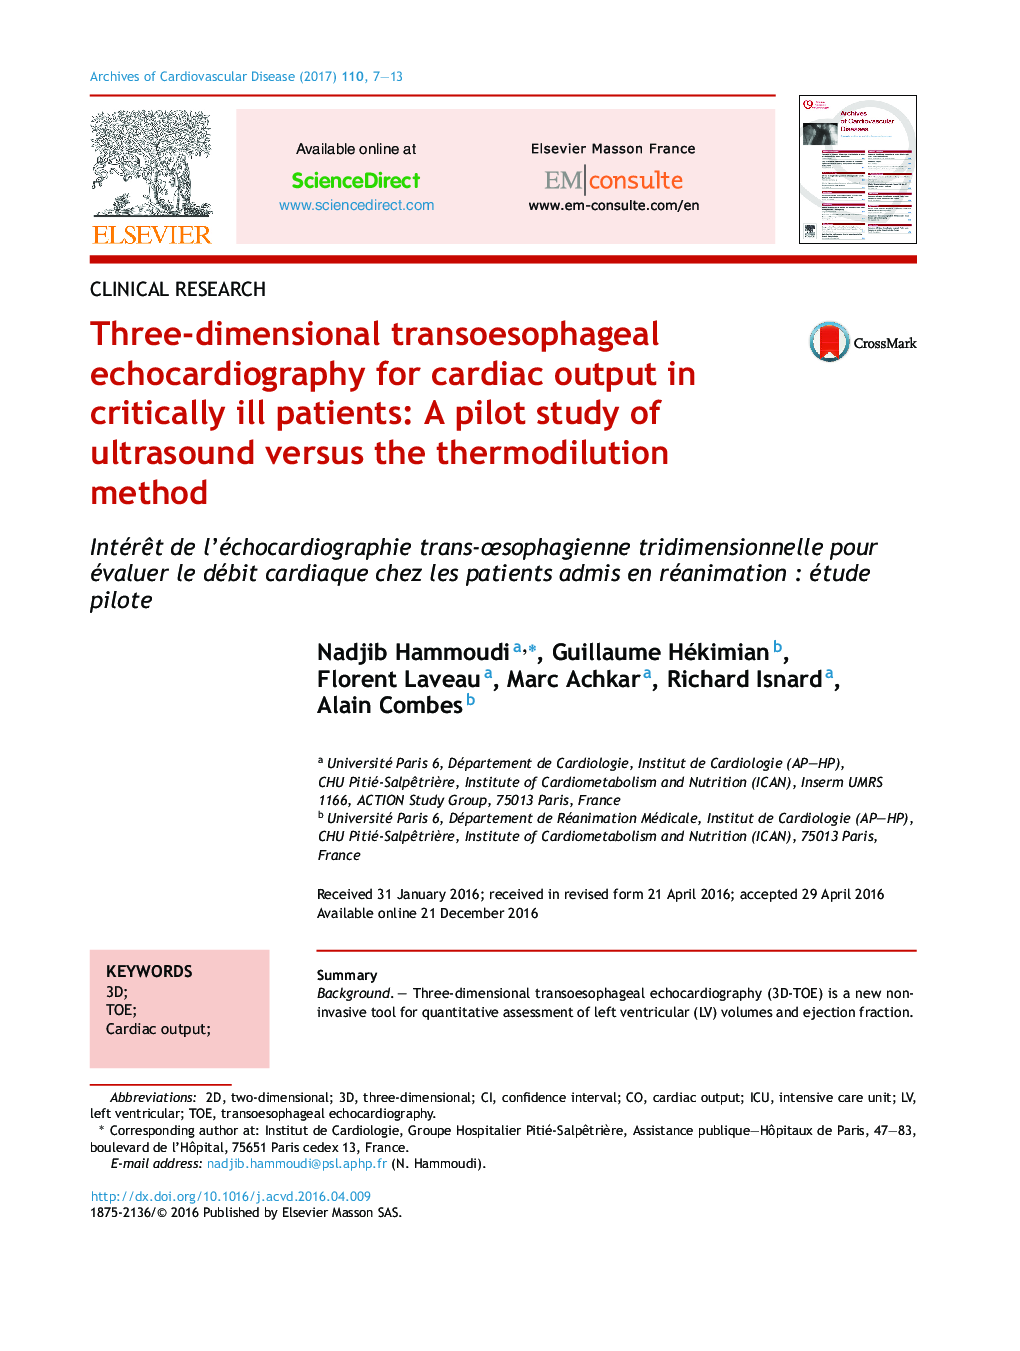 Clinical ResearchThree-dimensional transoesophageal echocardiography for cardiac output in critically ill patients: A pilot study of ultrasound versus the thermodilution methodIntérÃªt de l'échocardiographie trans-Åsophagienne tridimensionnelle pour 